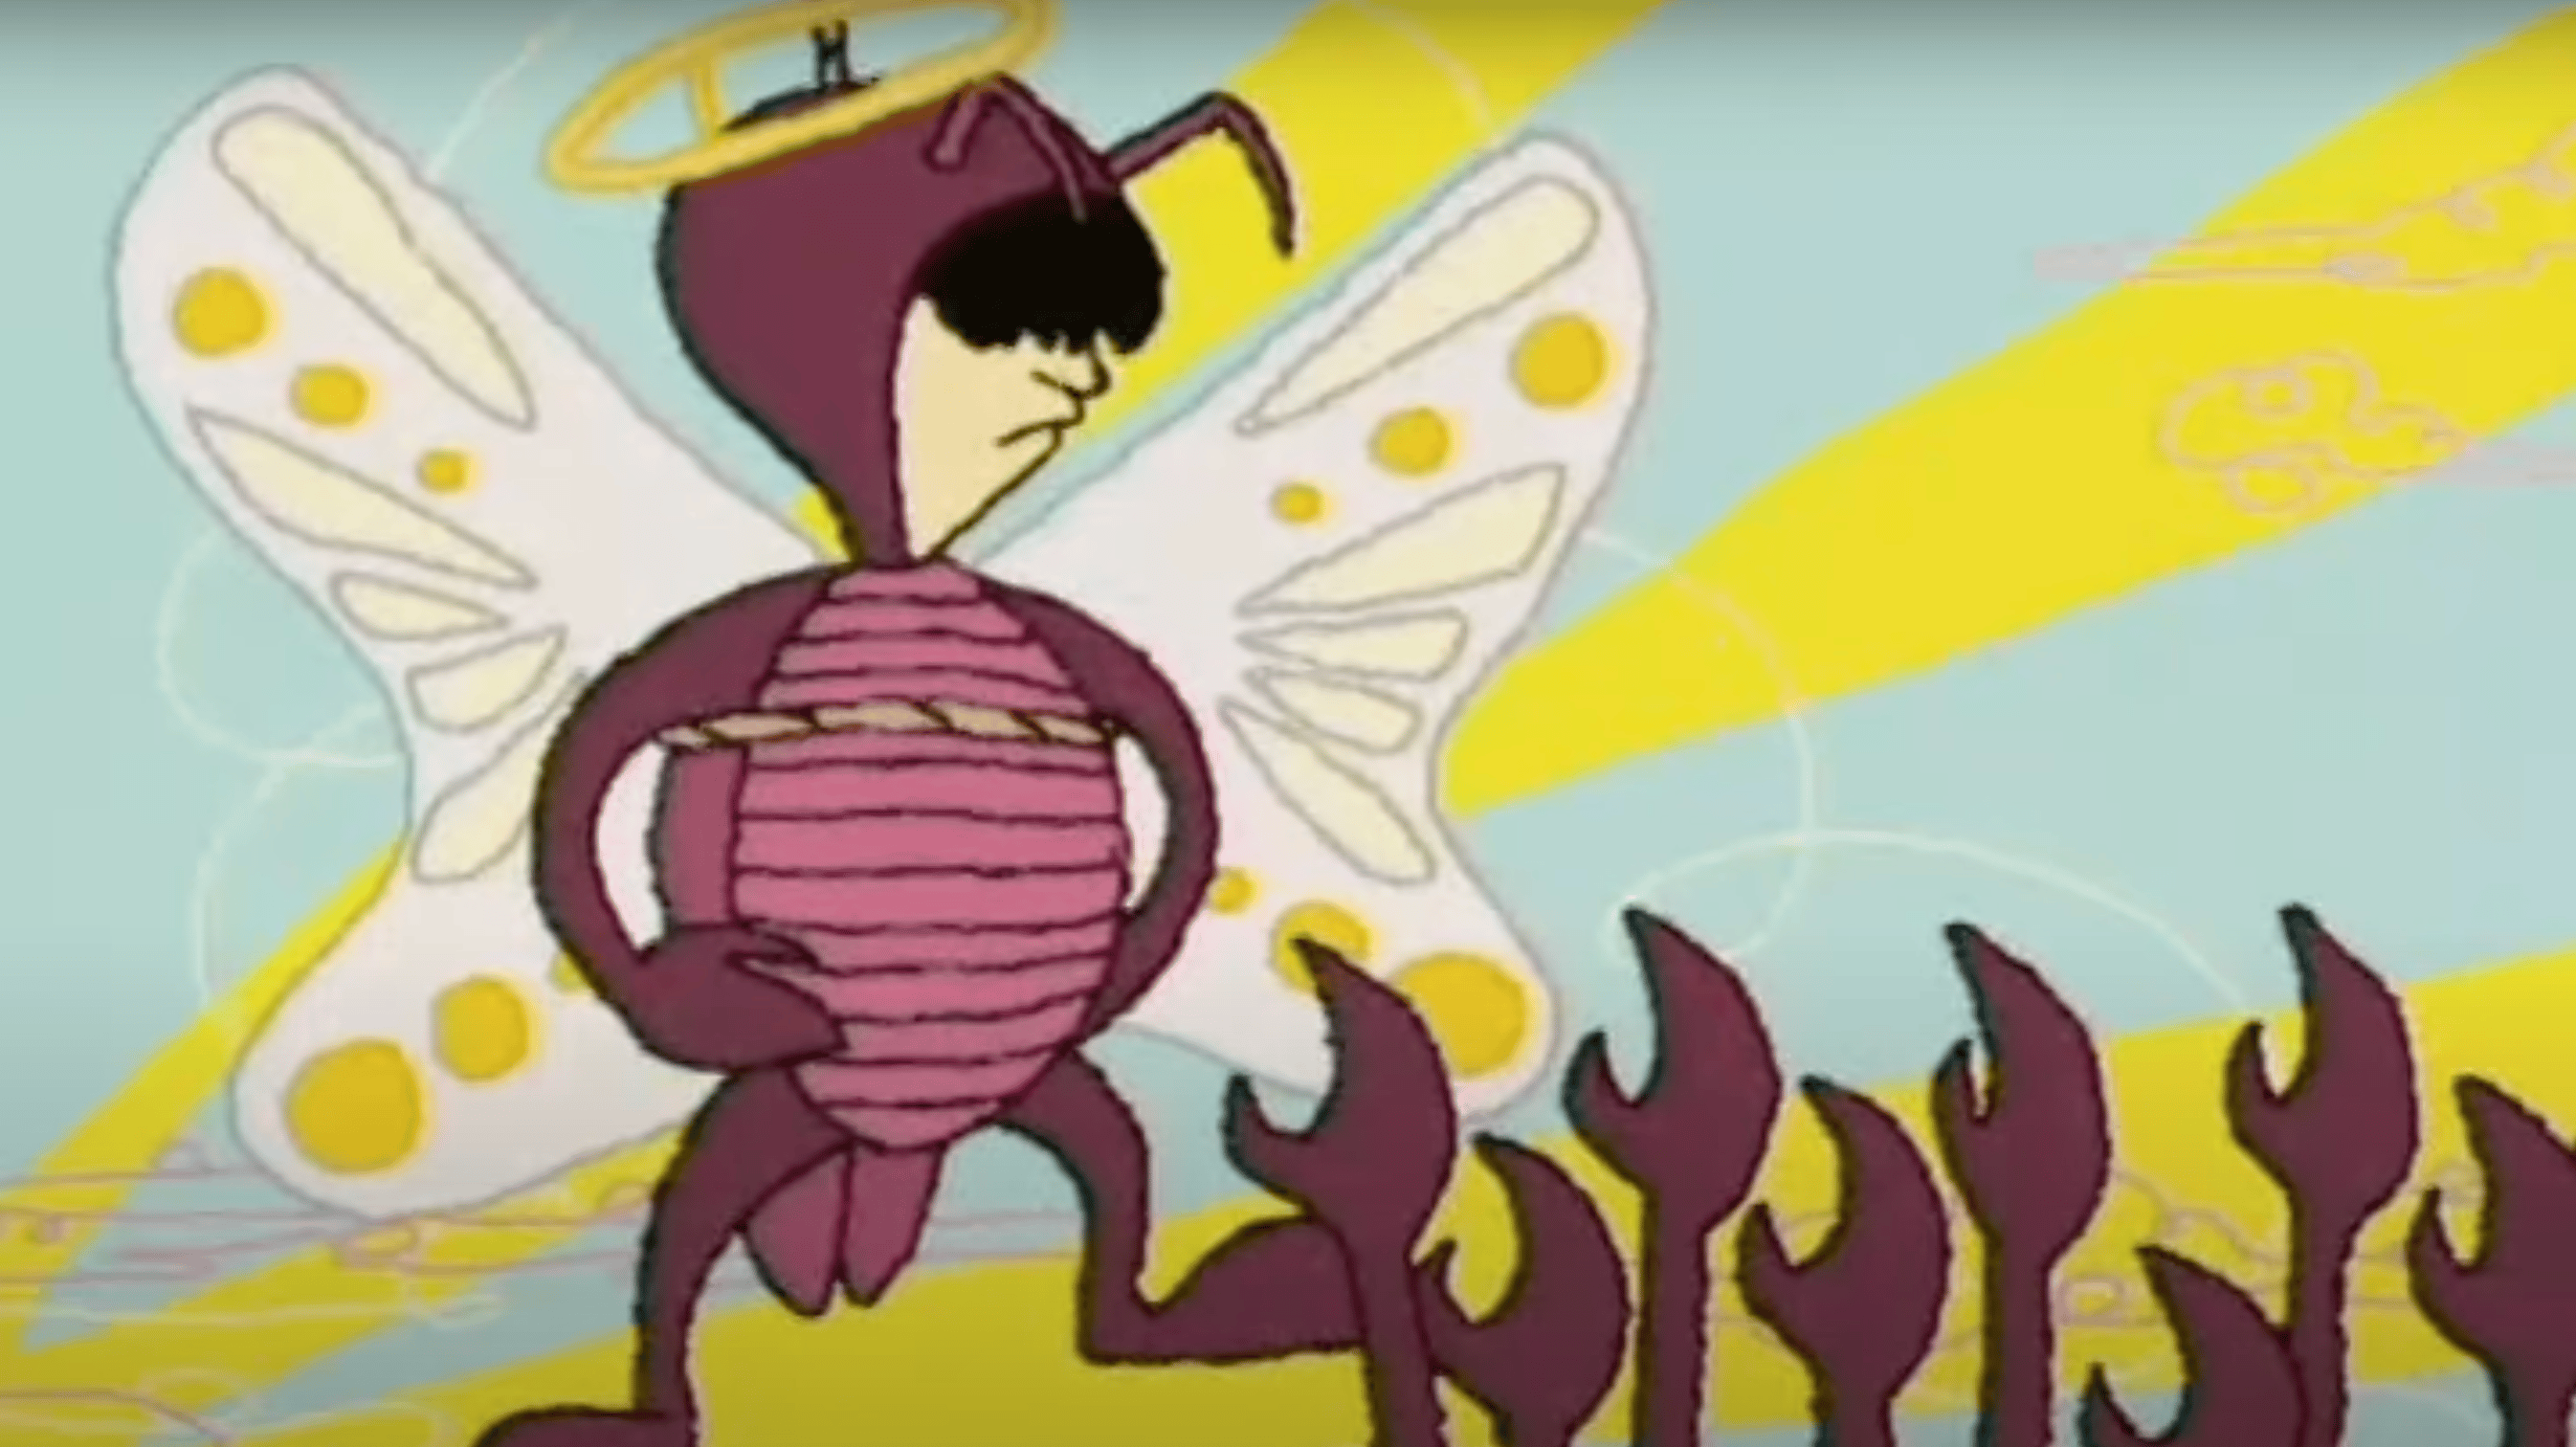 A scene from "Home Movies:" character Dwayne dressed as a bug, with a halo and wings, while bug claws reach up to praise him